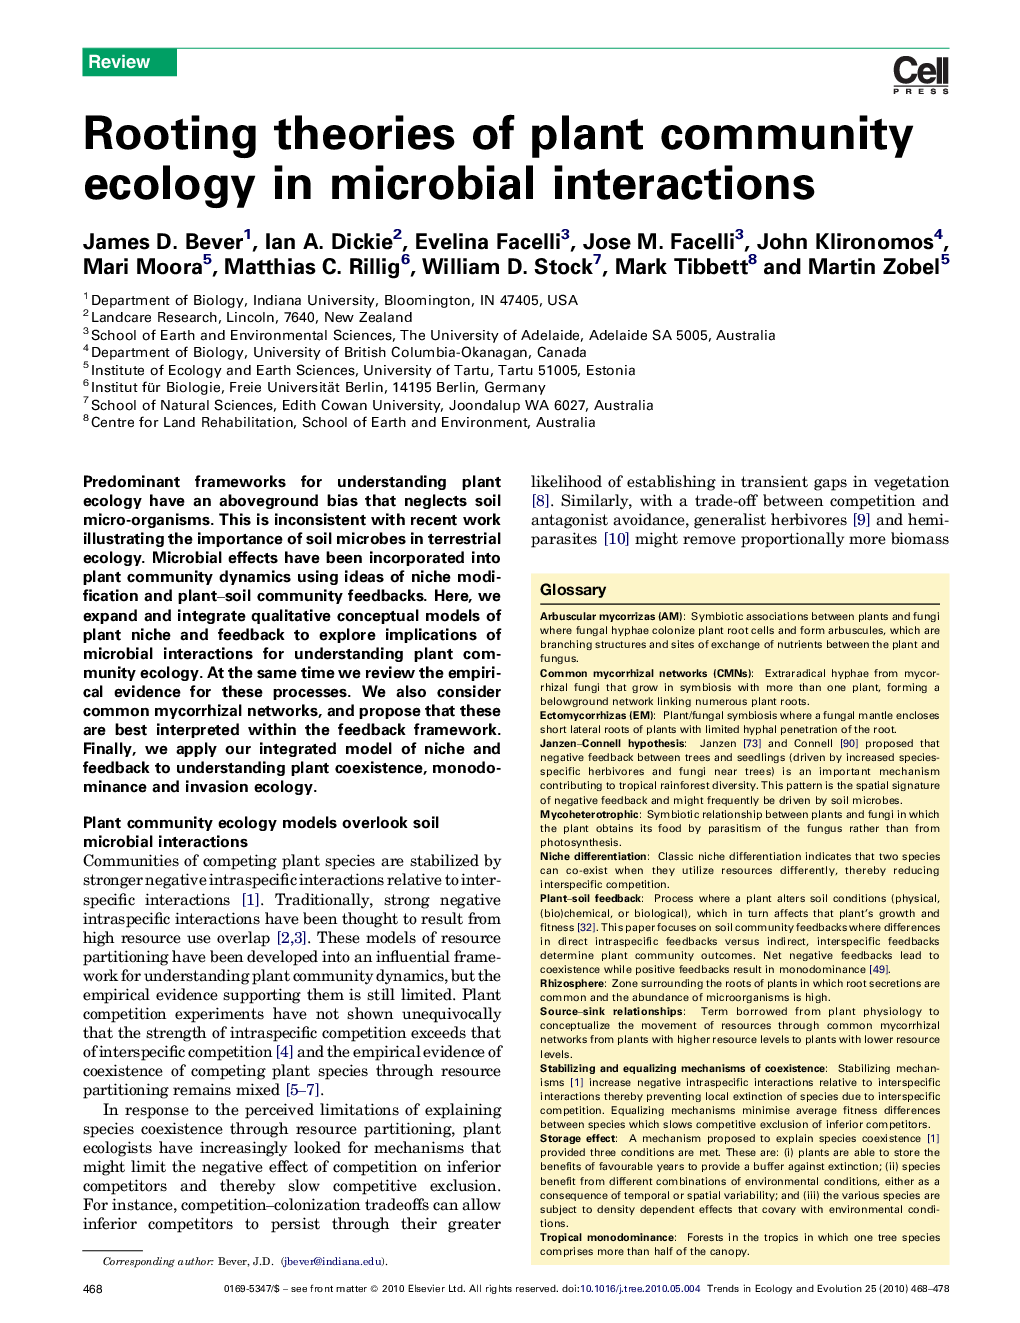 Rooting theories of plant community ecology in microbial interactions